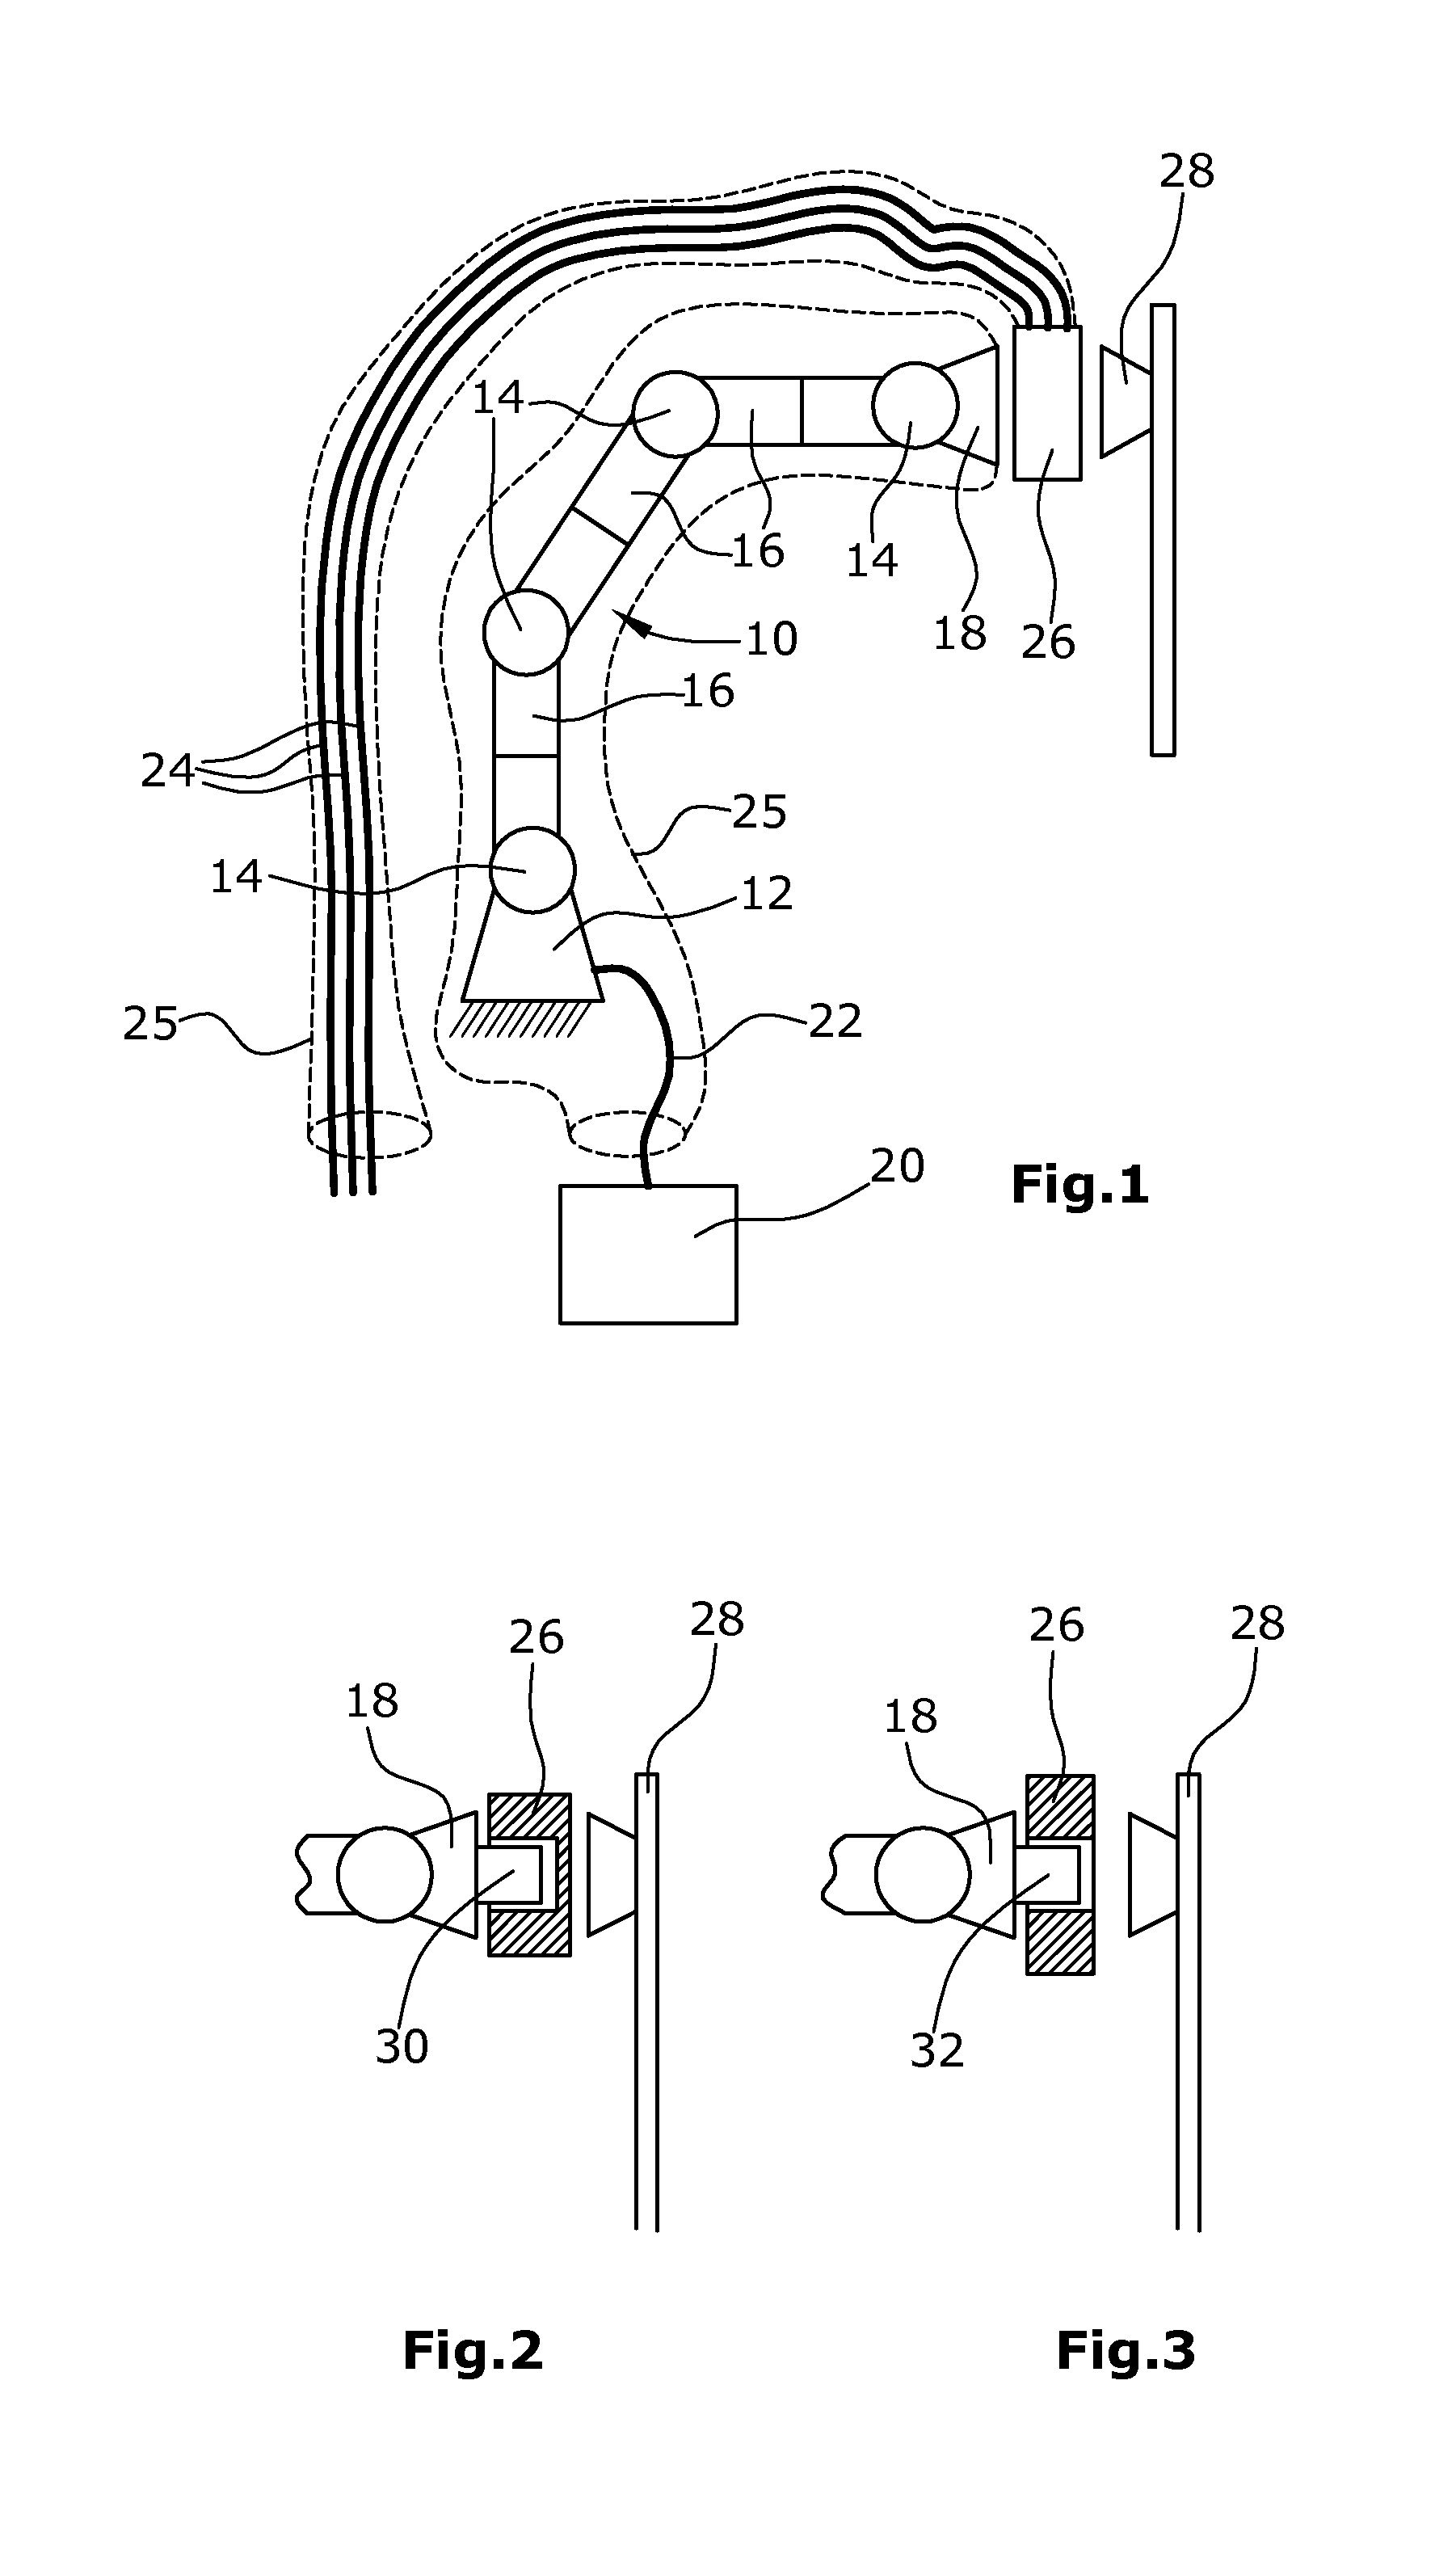 Robotic arrangement for use in medical fields